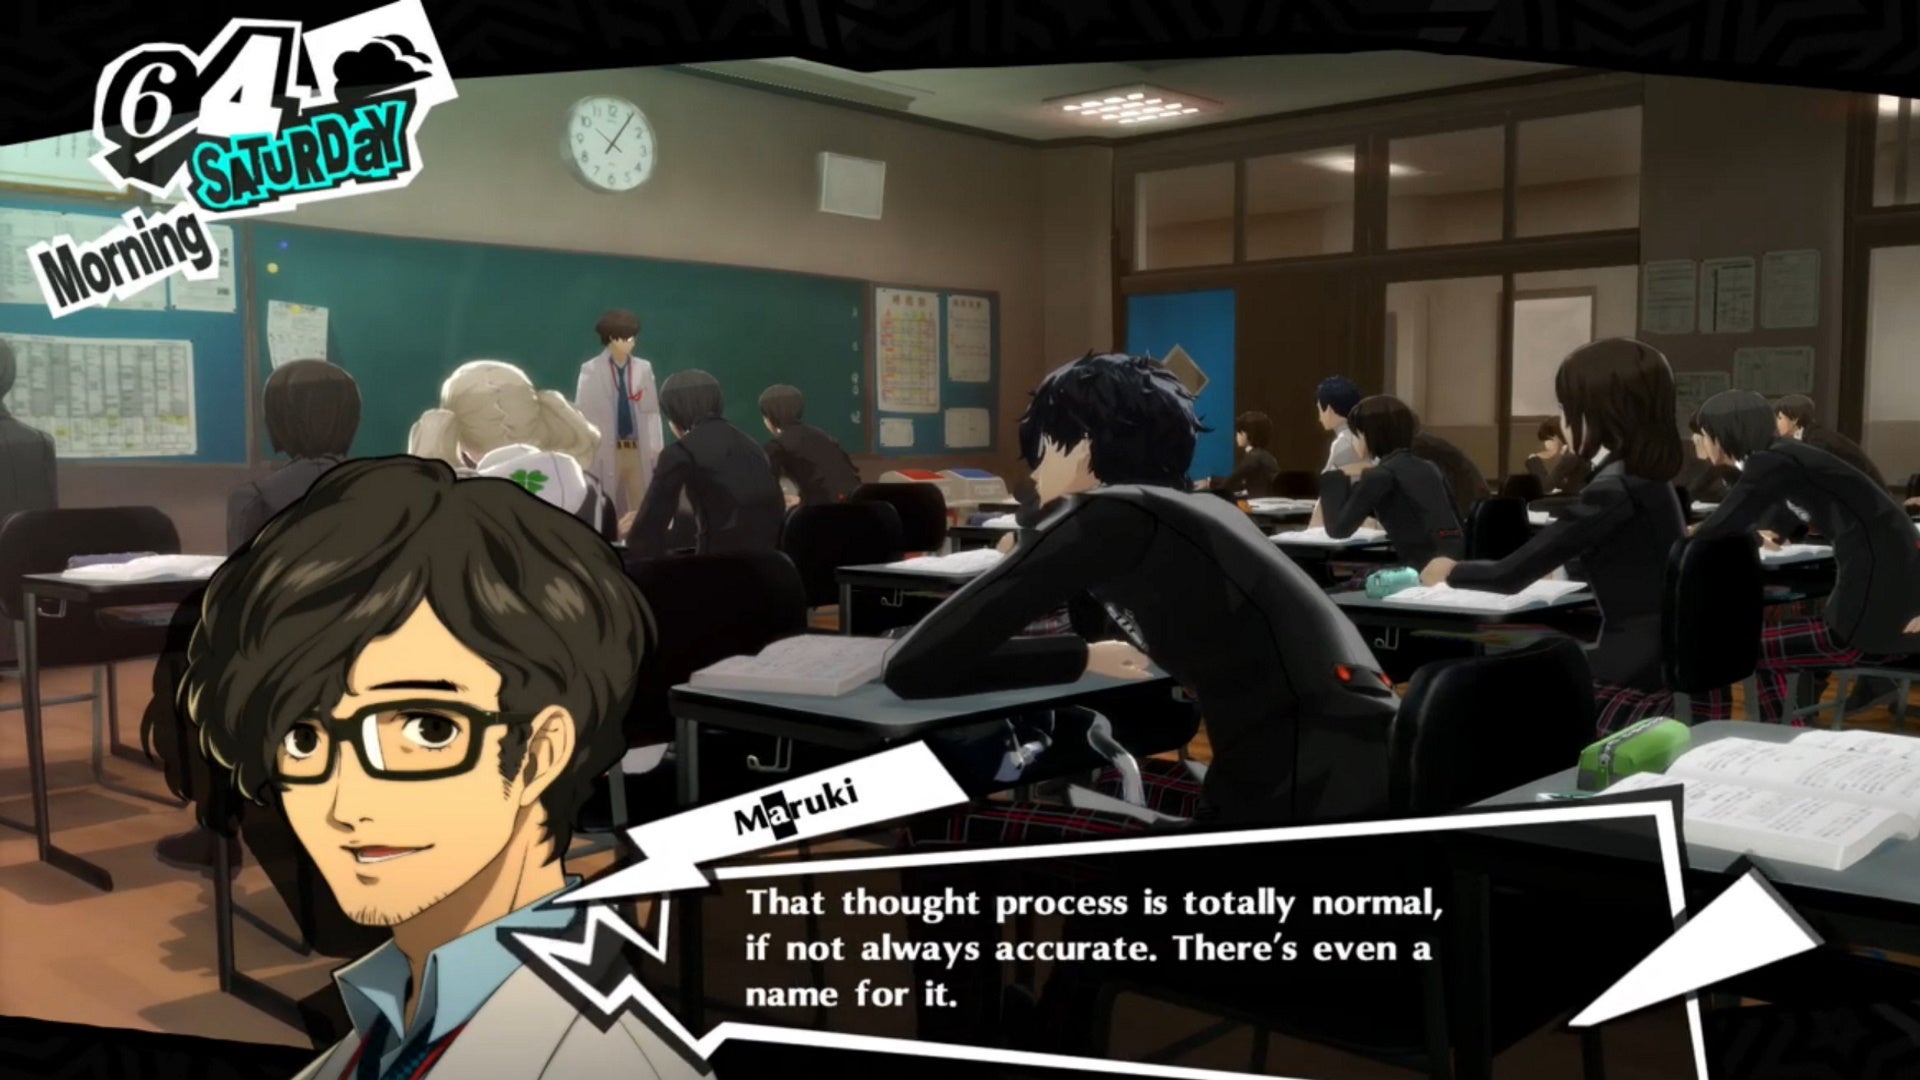 Persona 5 Royal classroom answers June: An anime man wearing glasses asks his students a question